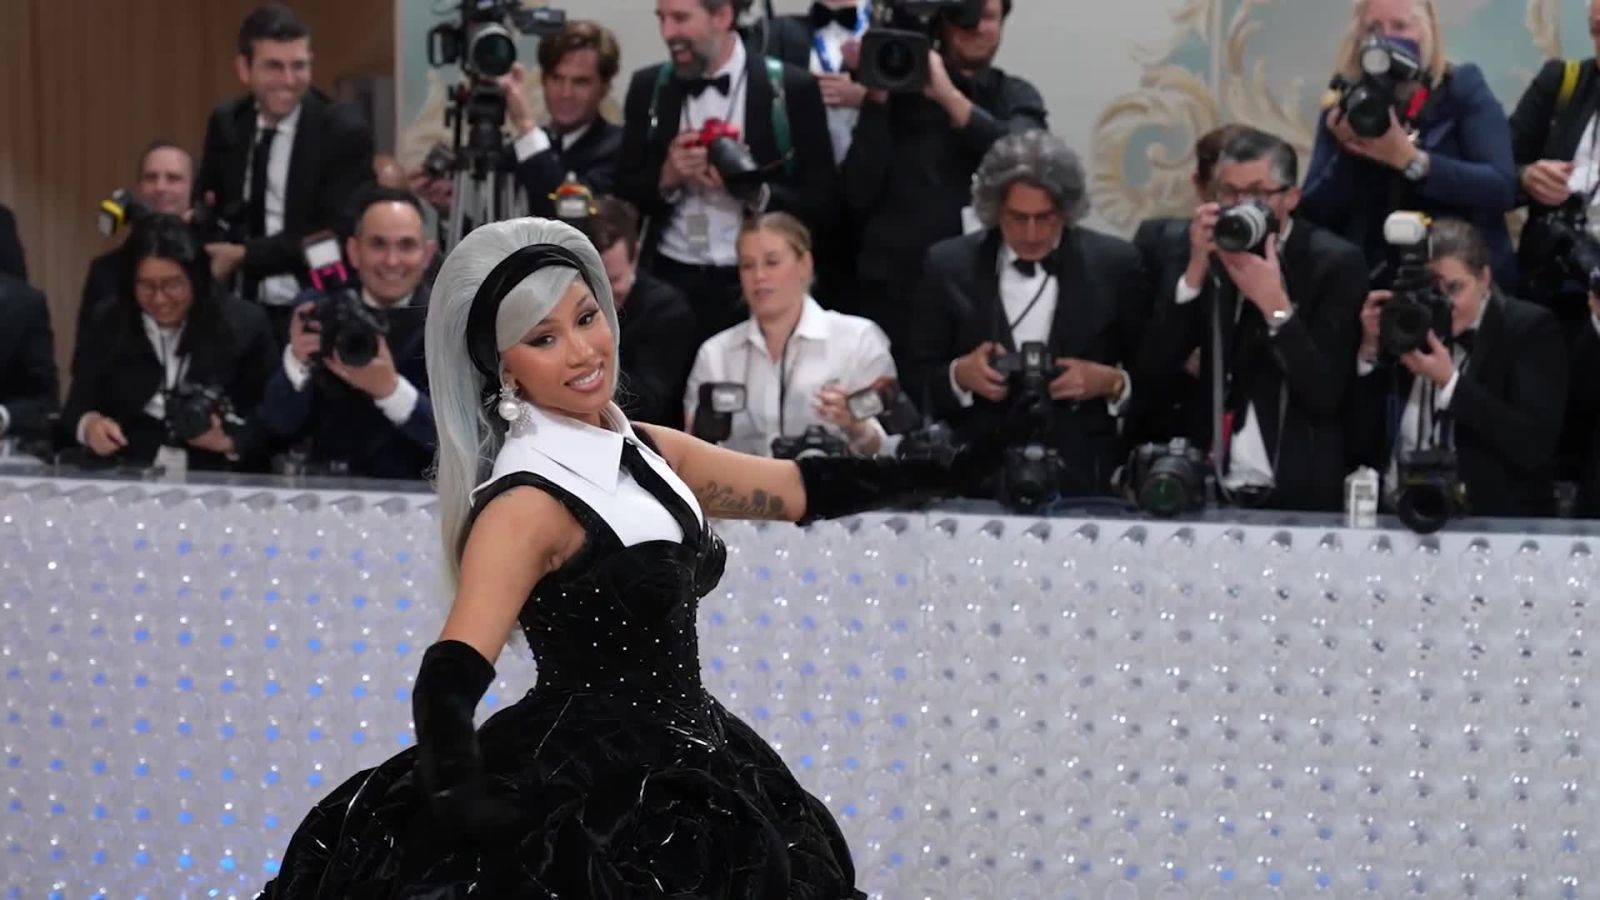 One Look Wasn’t Enough for Cardi B at the Met Gala